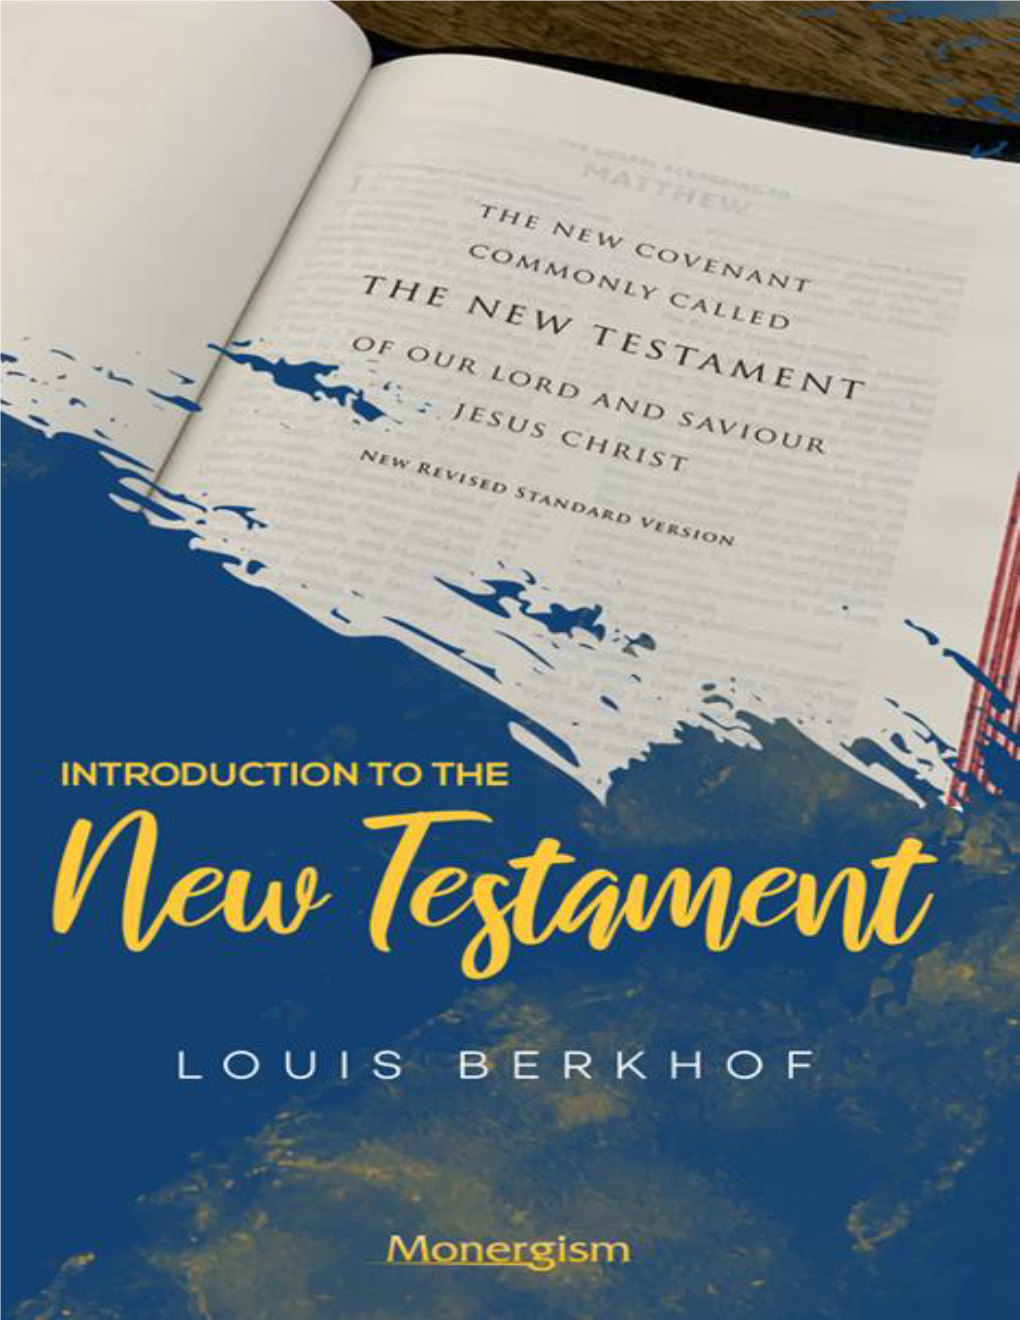 Introduction to the New Testament (Pdf)